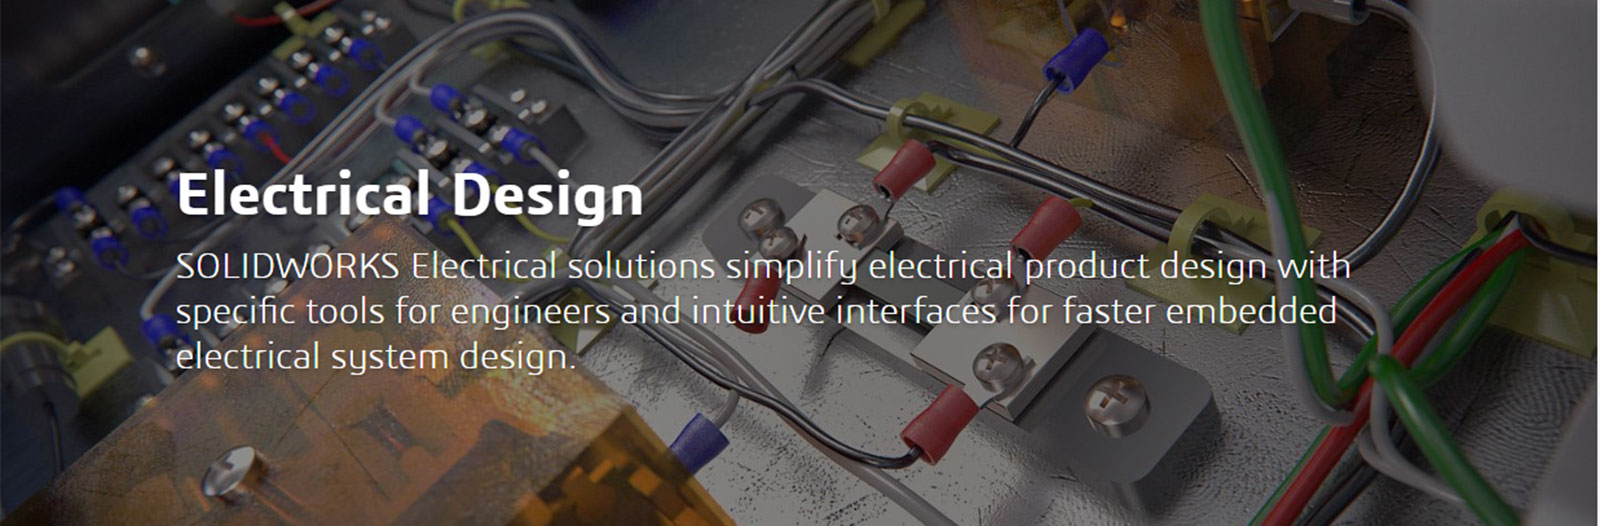 banner-Electrical